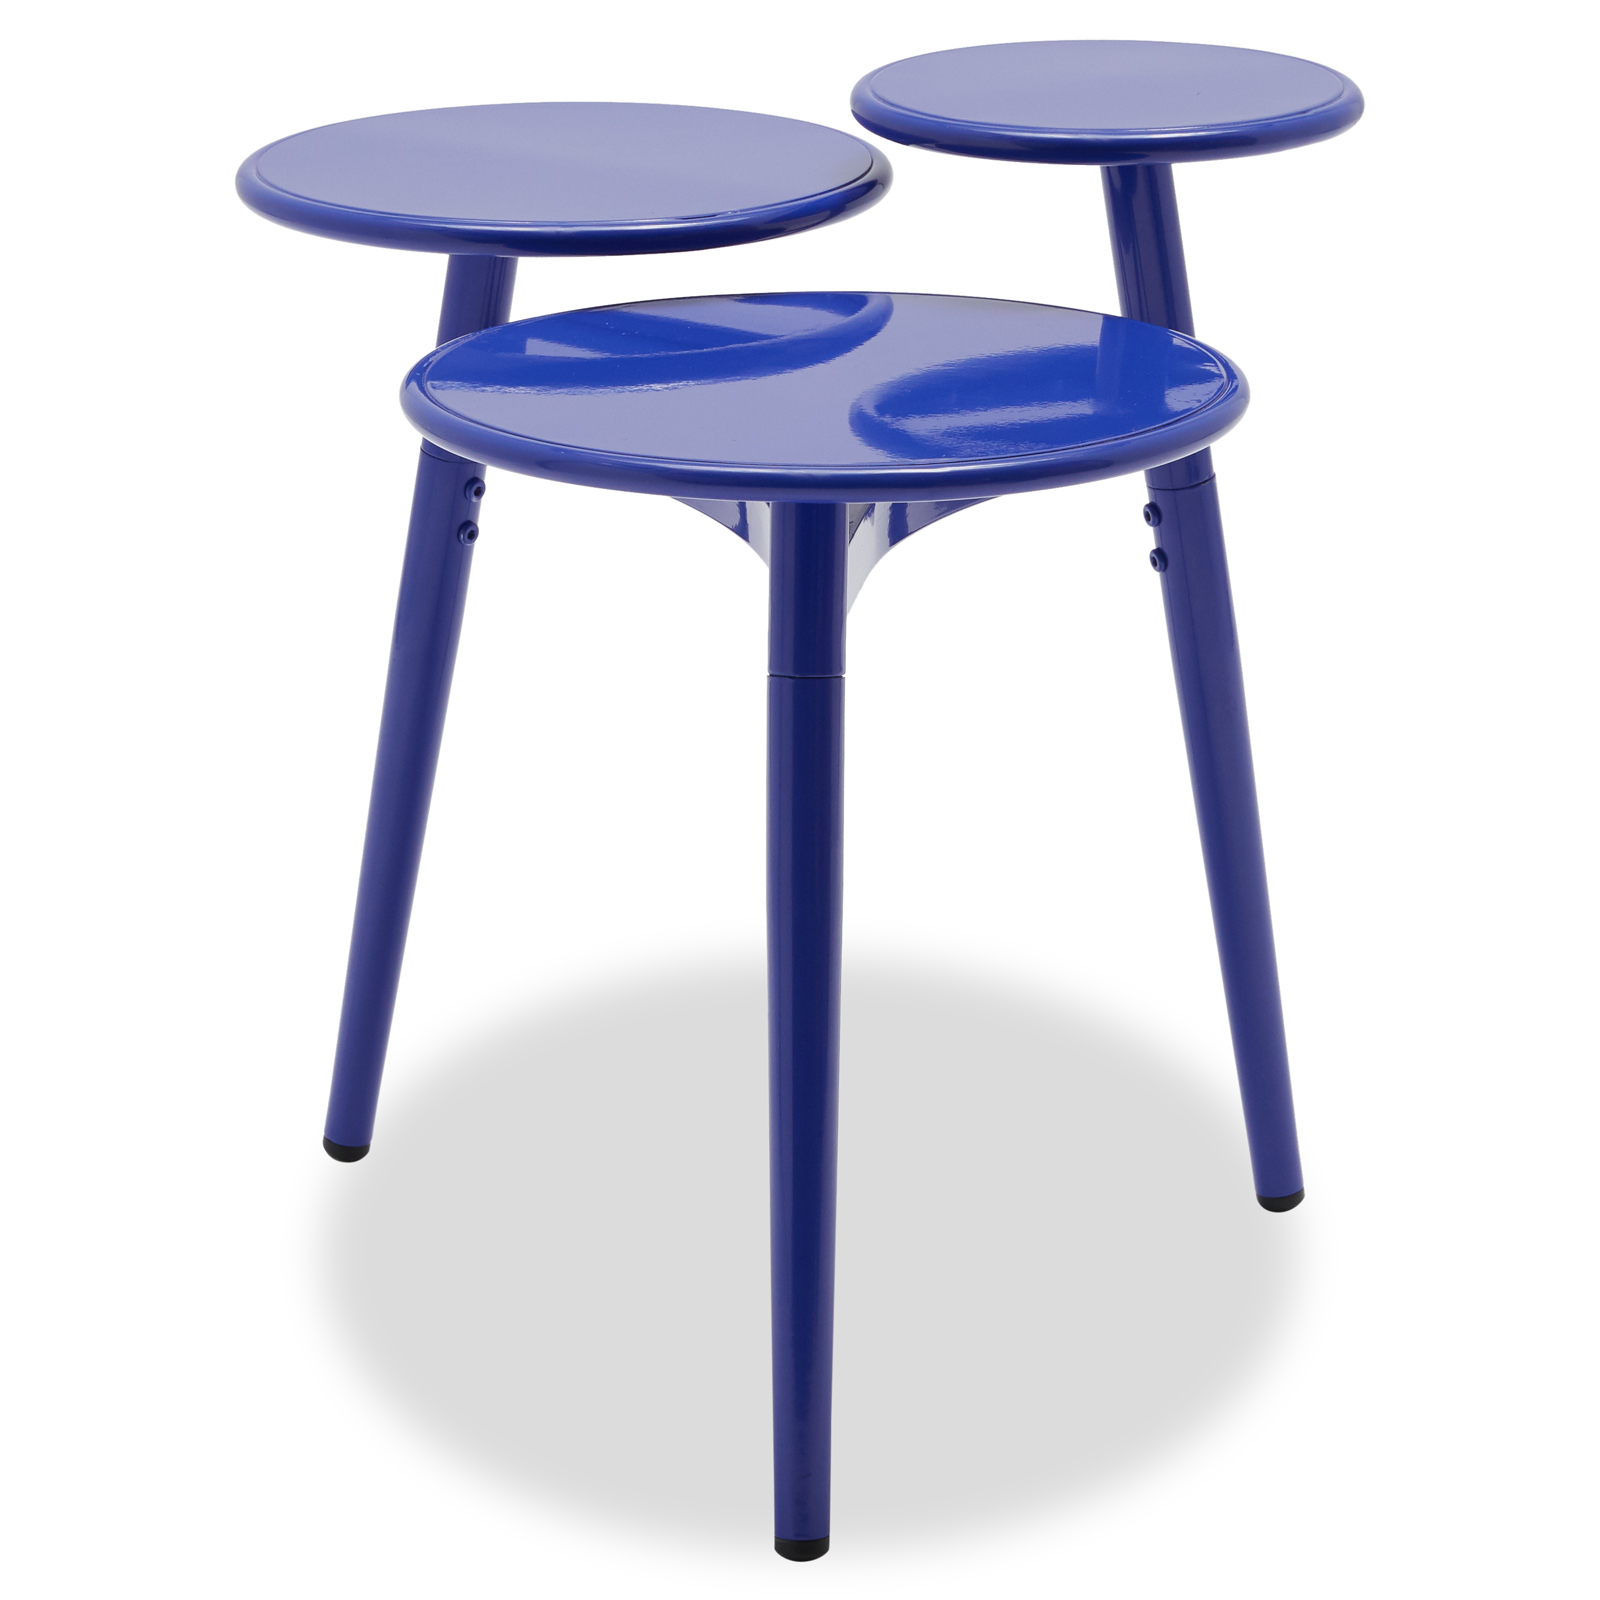 Multi-Tier Metal Accent Table, Multiple Colors by Drew Barrymore Flower Home - image 3 of 15